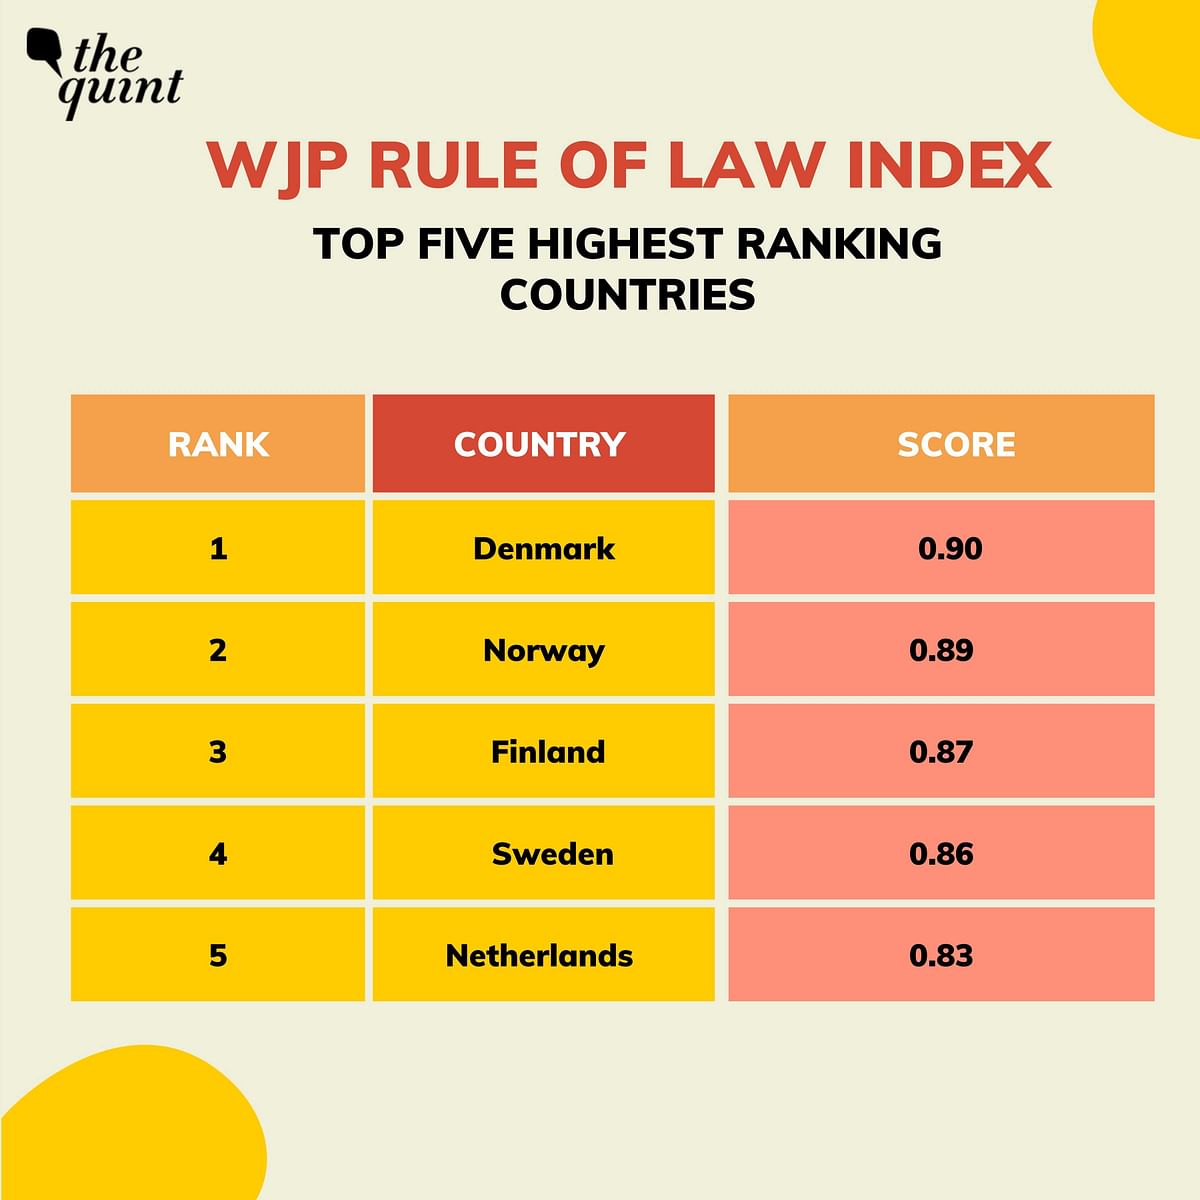 But what is the rule of law? How is it related to rising authoritarianism? And what does the data for India show? 